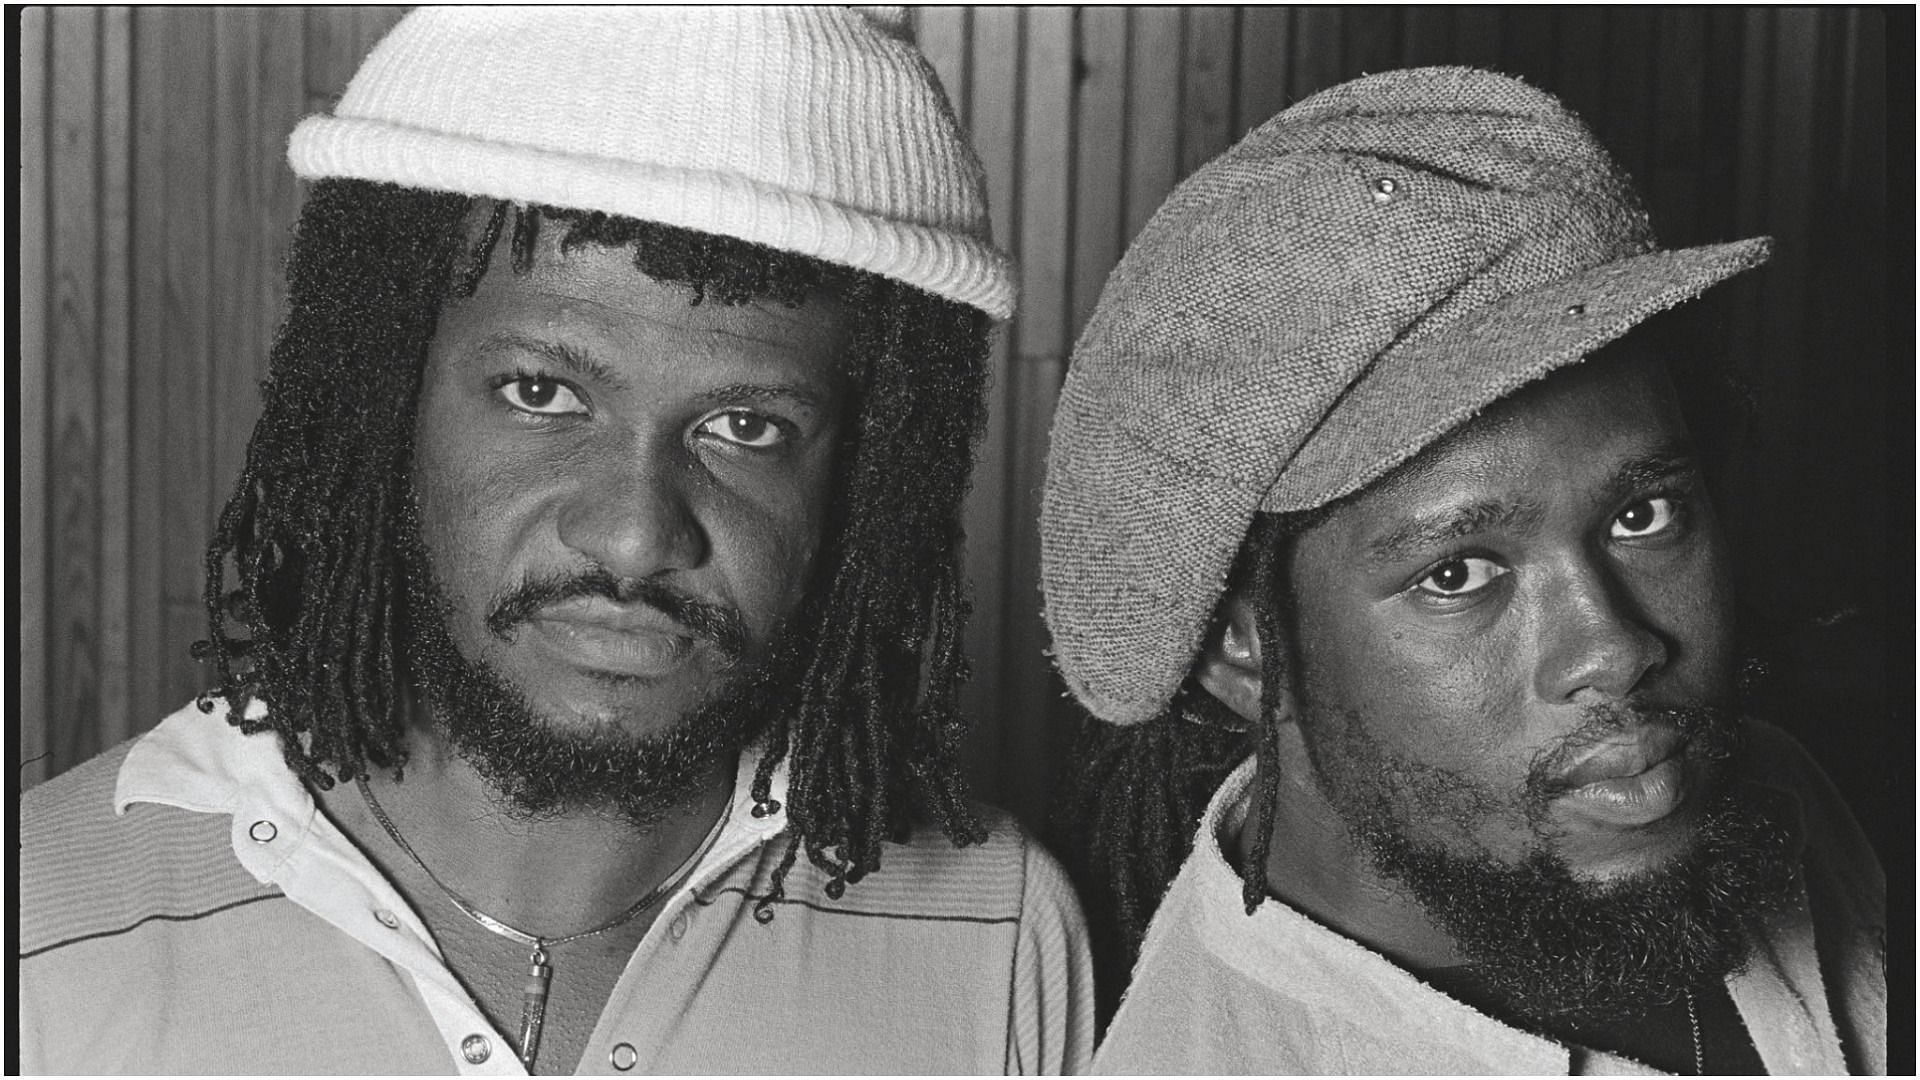 Reggae Musicians Sly Dunbar and Robbie Shakespeare (Image by Lynn Goldsmith via Getty Images)